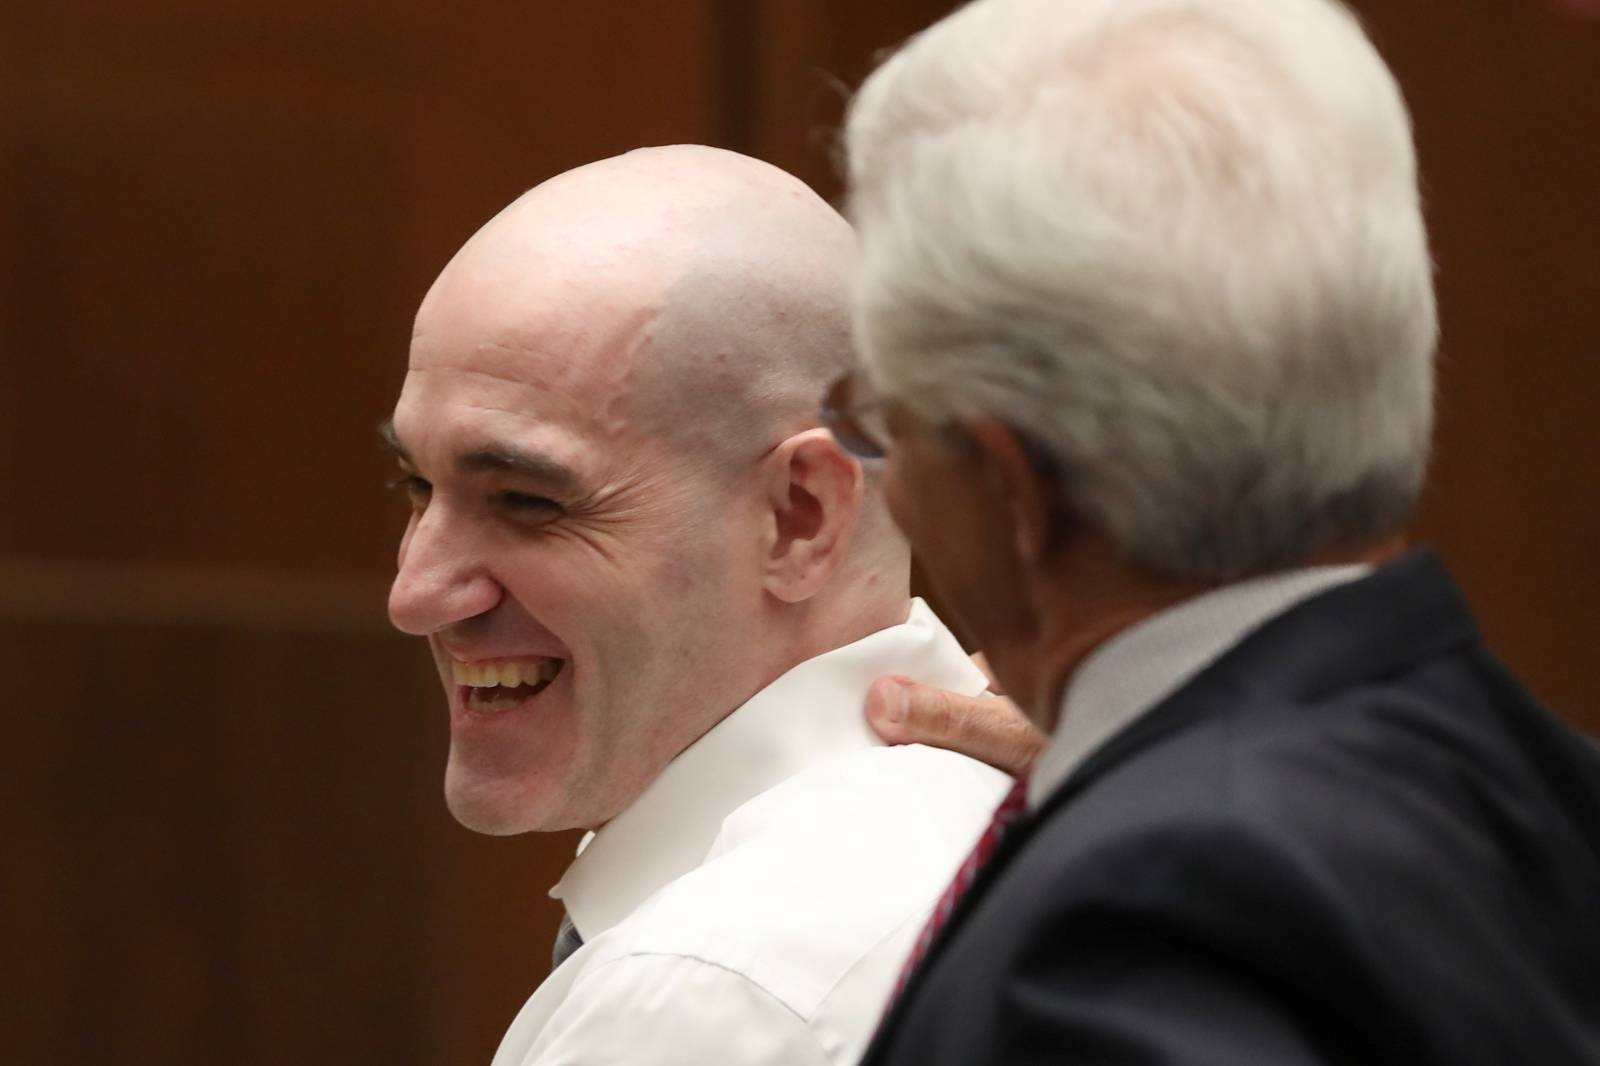 Michael Gargiulo sits in court with his lawyer, Daniel Nardoni, during his murder trial in Los Angeles